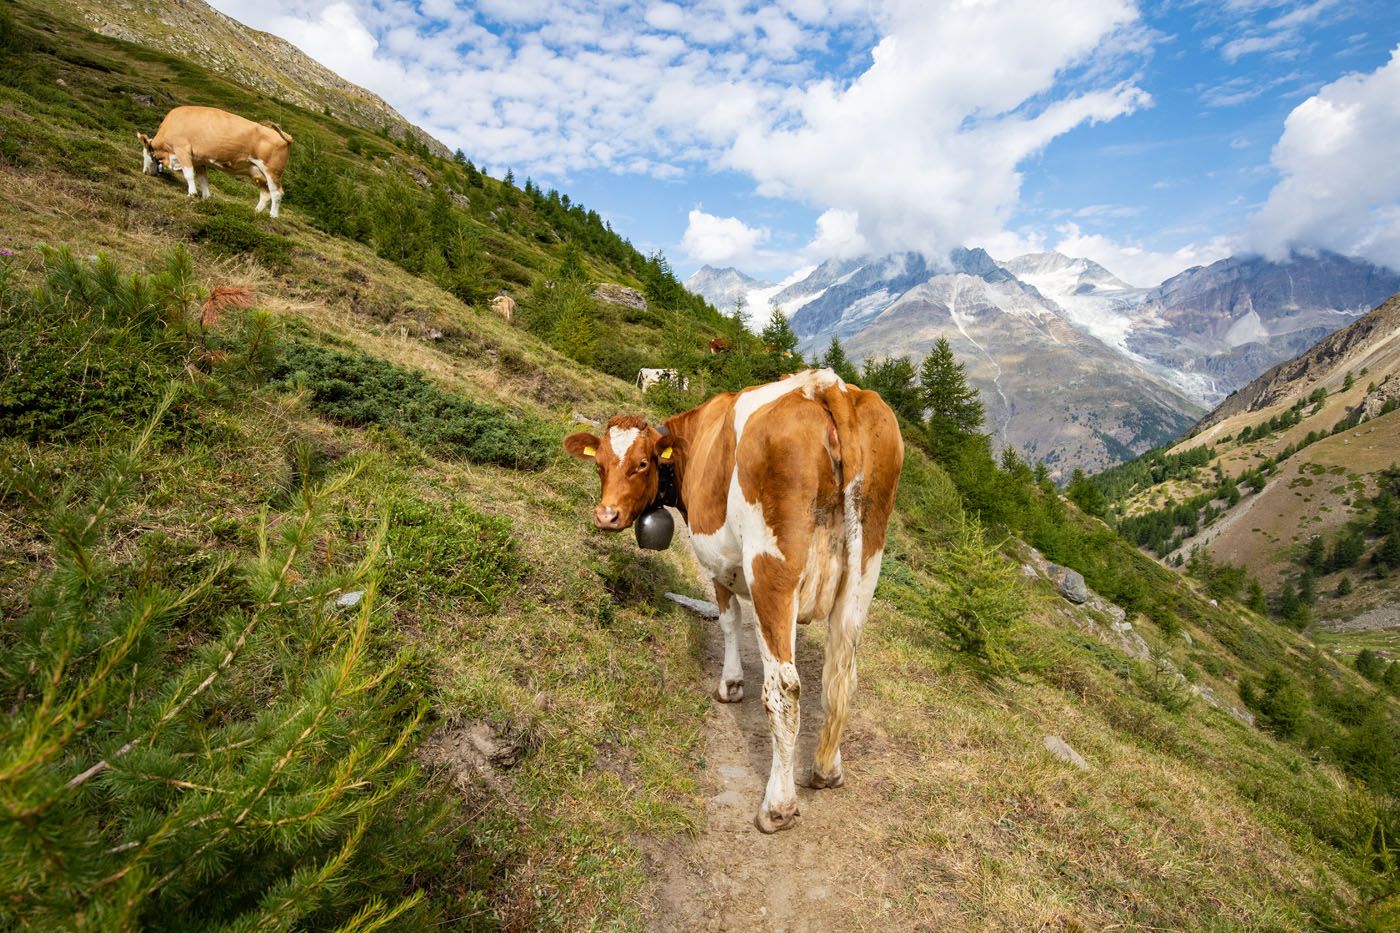 Cows on the Trail